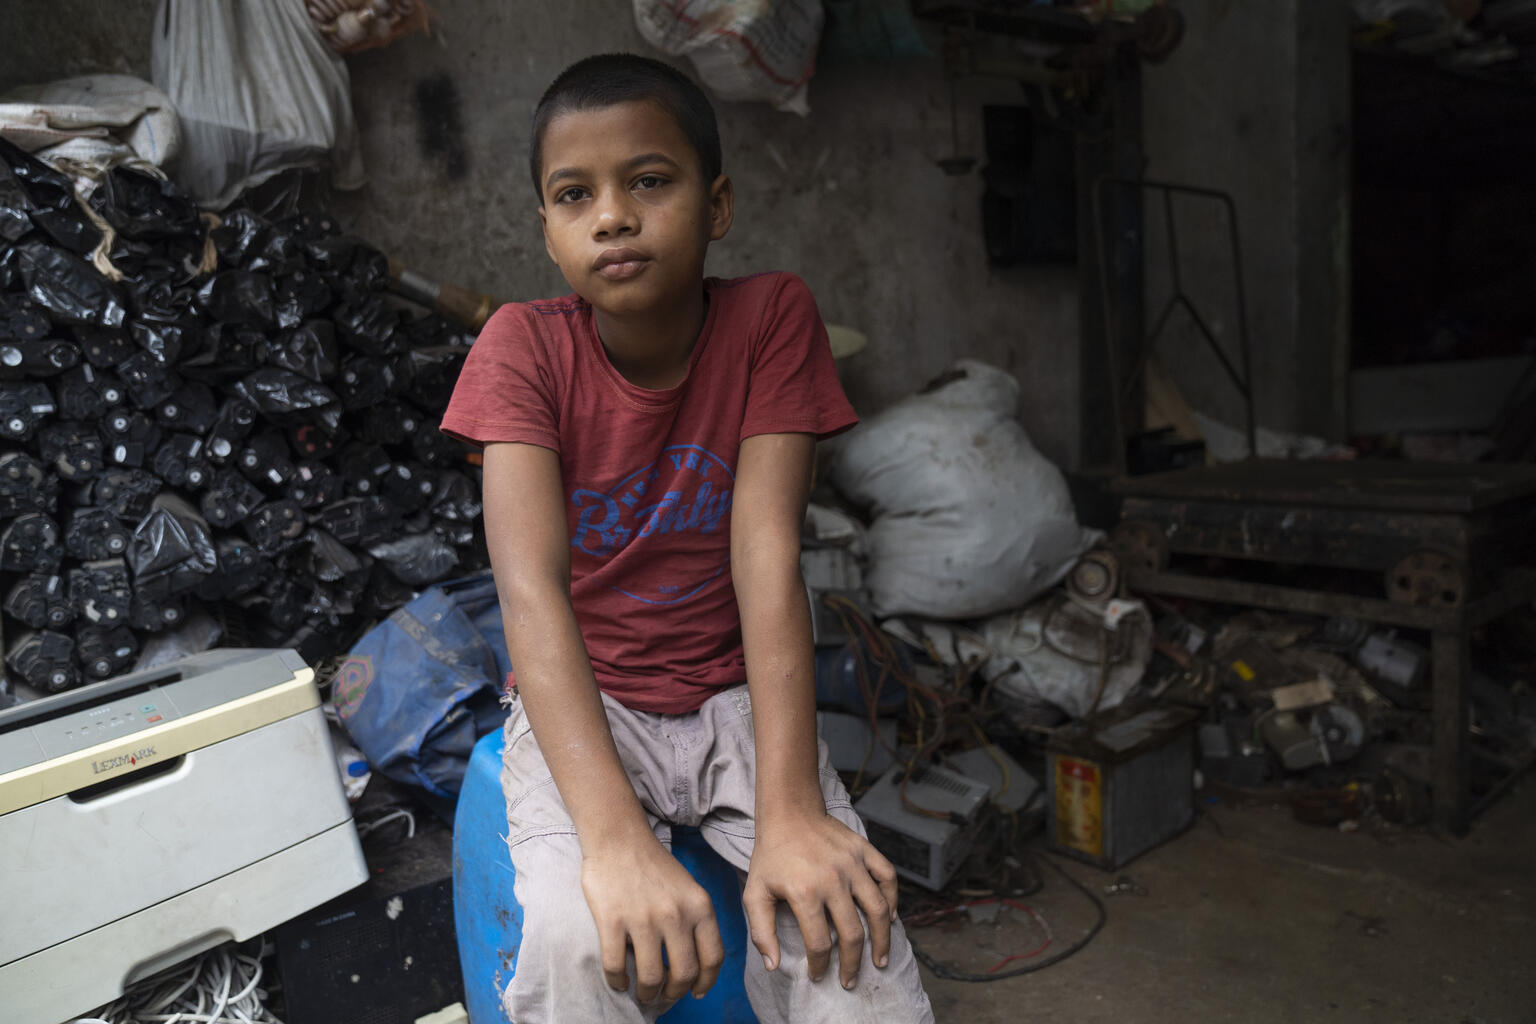 Sabbir child laborer, 10 years old, works in a small E-waste recycling shop in Dhaka.